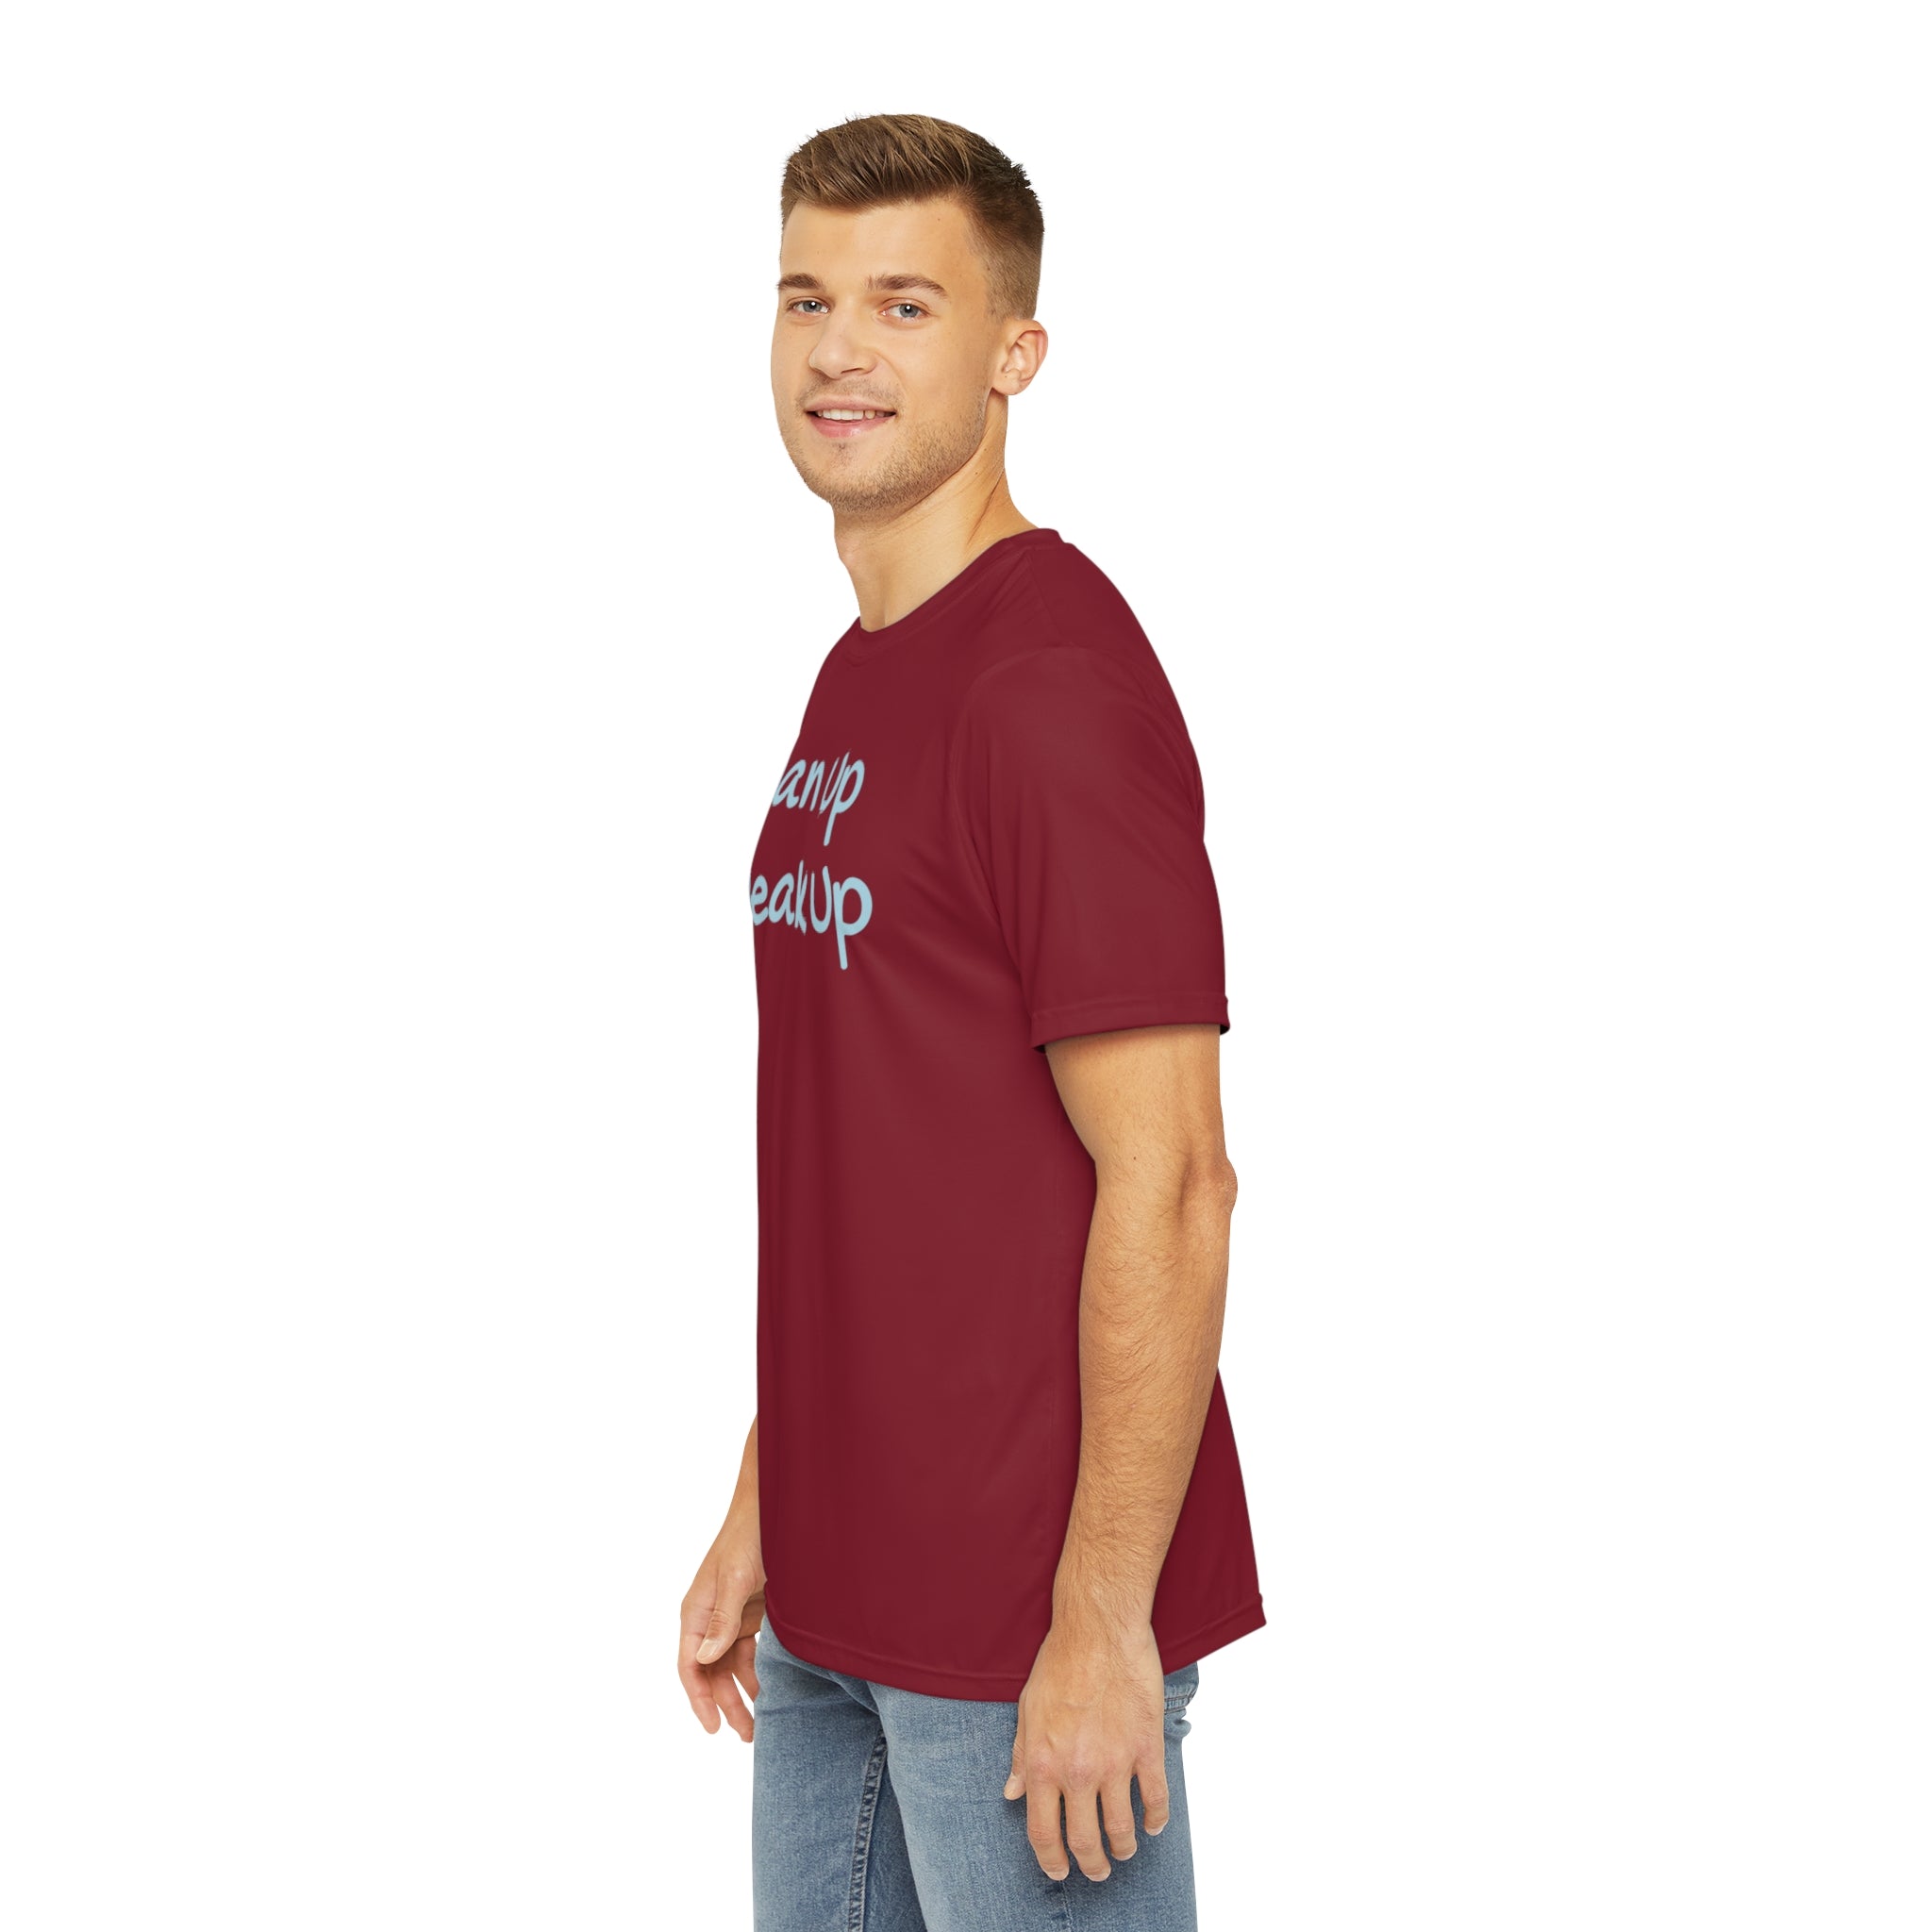 Man Up Speak Up T-shirt: Strength in Expression Athleisure Wear Mental Health Pledge Donation Polyester Style Support All Over Prints 11616485124208665055_2048 Printify